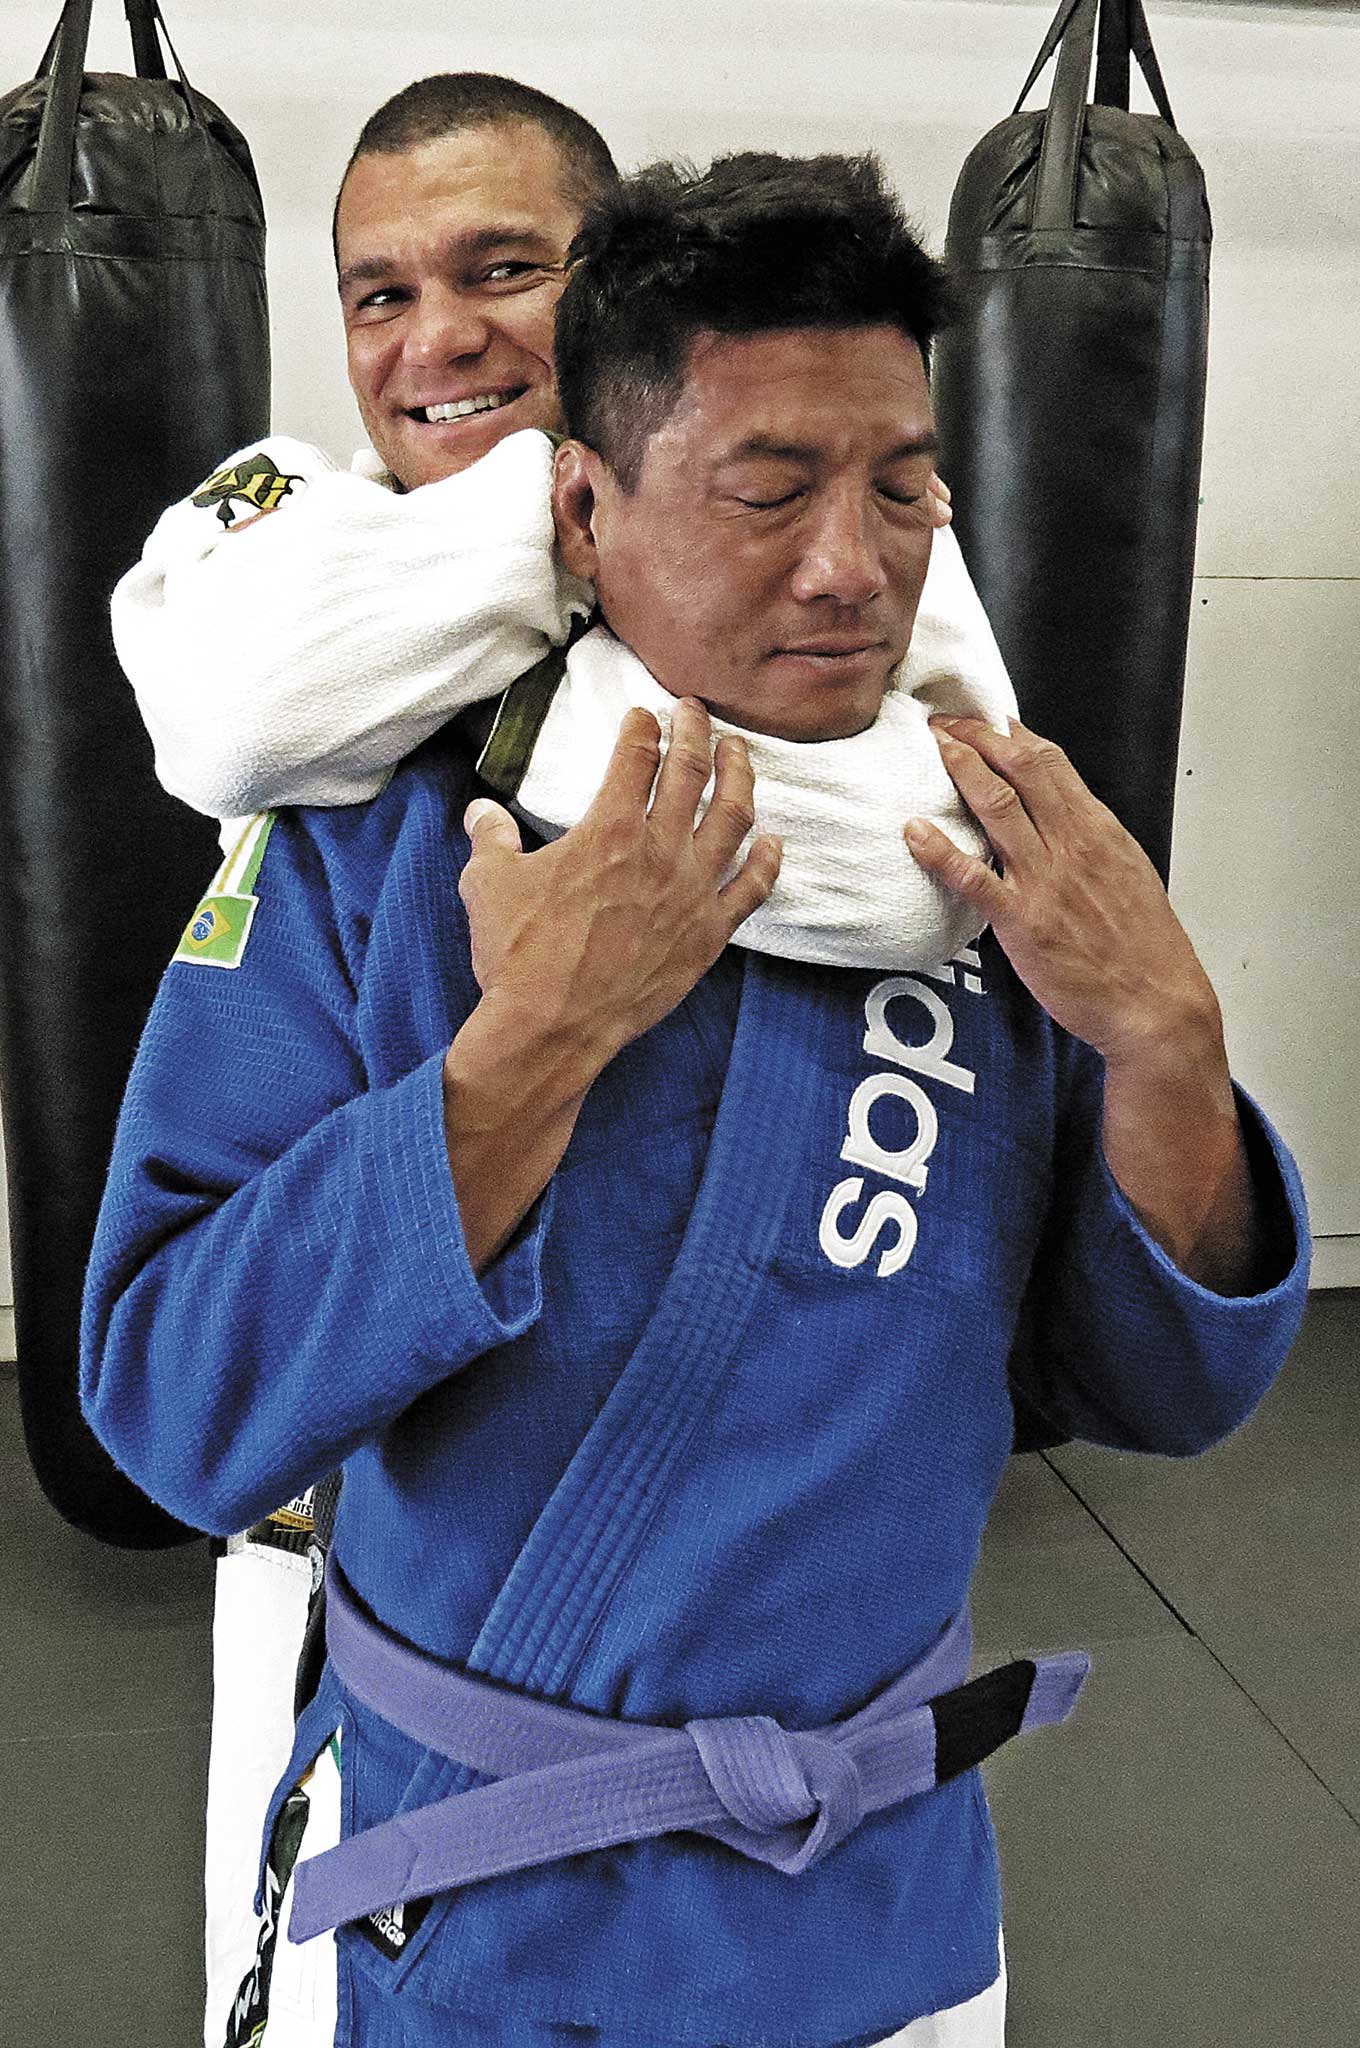 Unlocking the Confusion Around Chokeholds